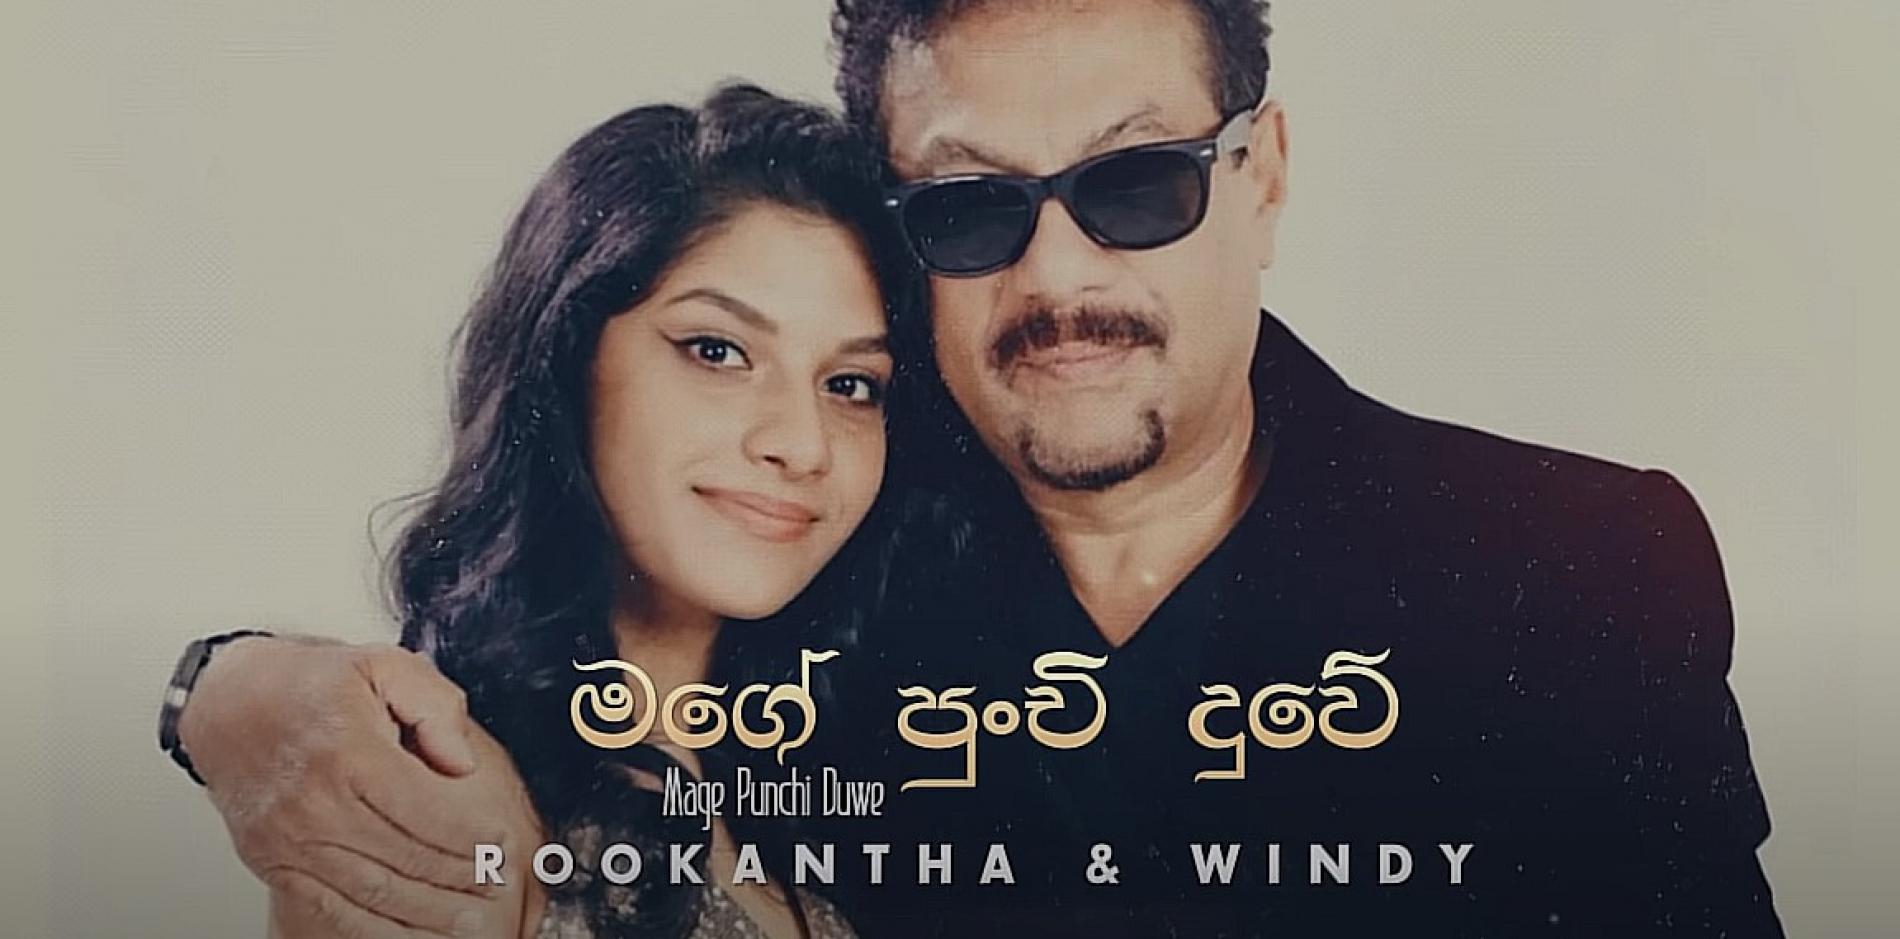 New Music : Mage Punchi Duwe (මගේ පුංචි දුවේ) – Rookantha & Windy | Father Daughter Song